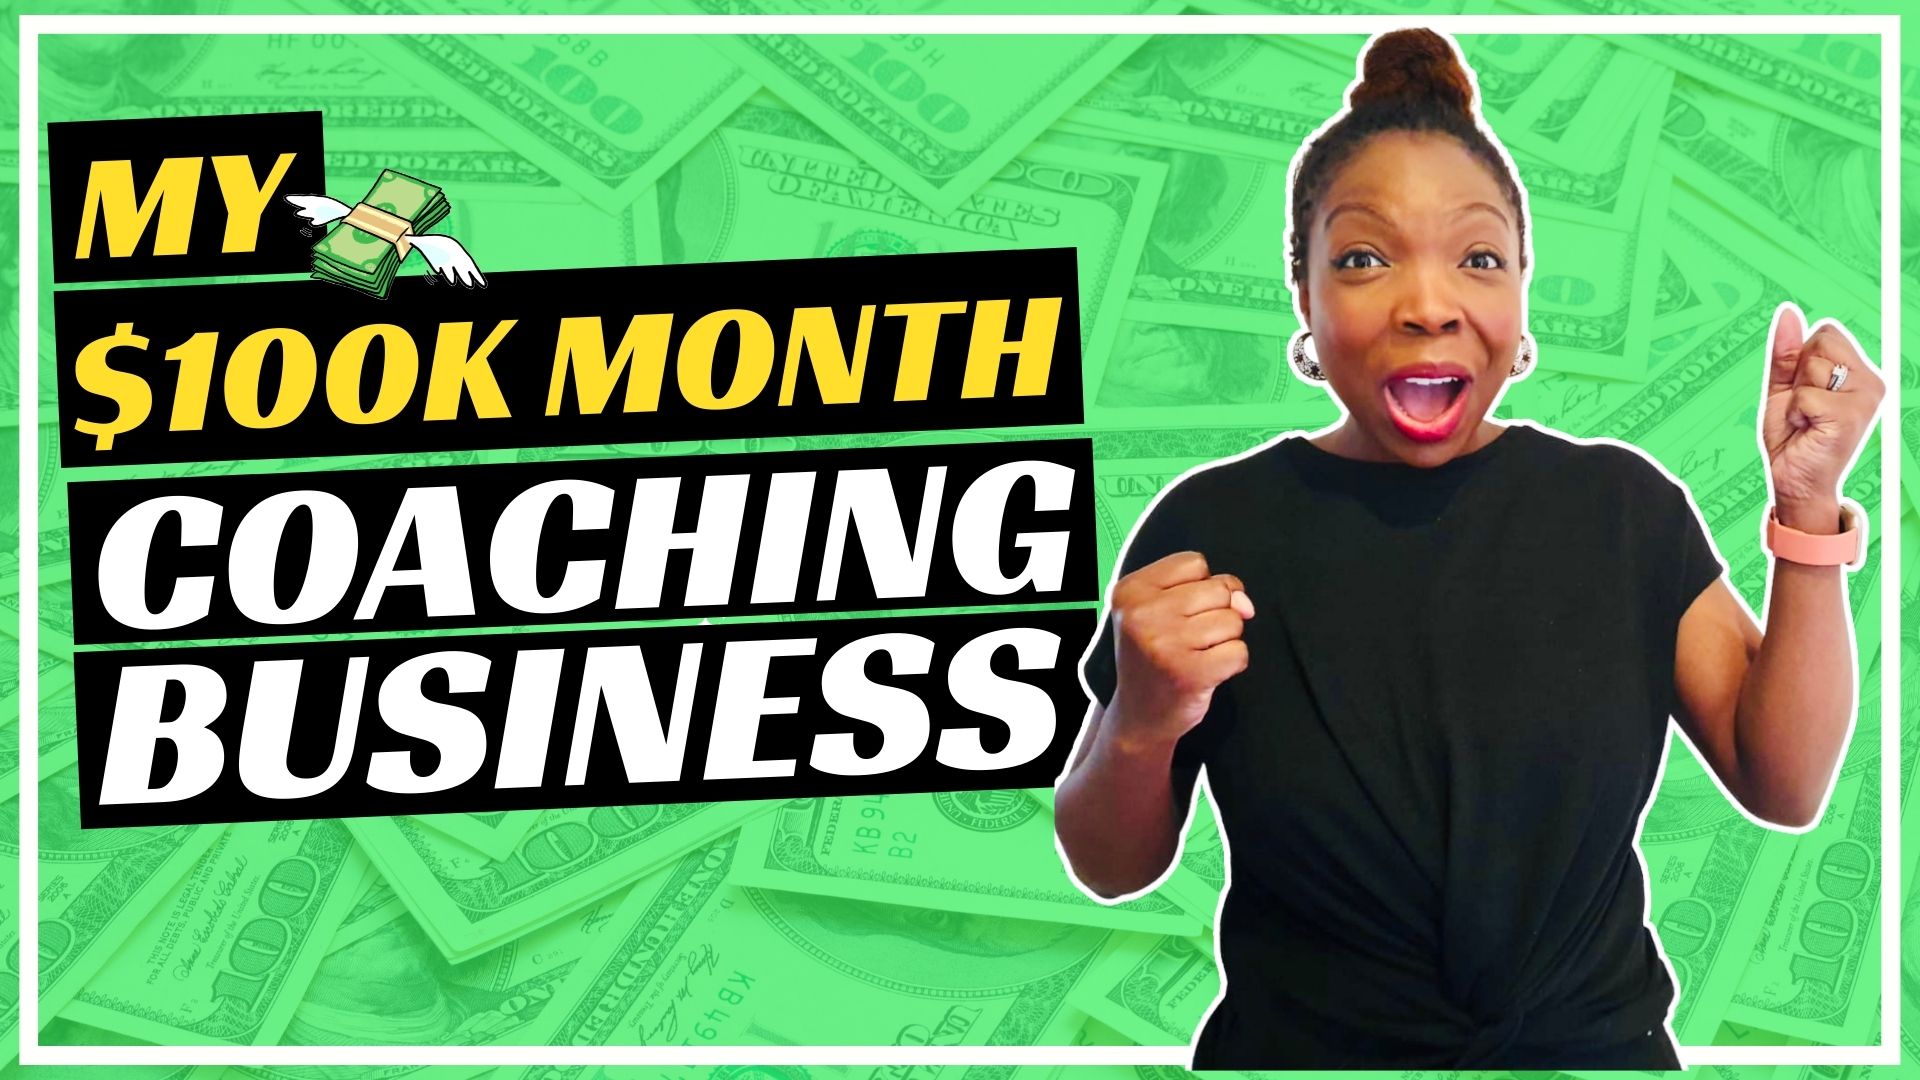 How to Make 6 Figures/Month ($100,000 as an Online Coach)